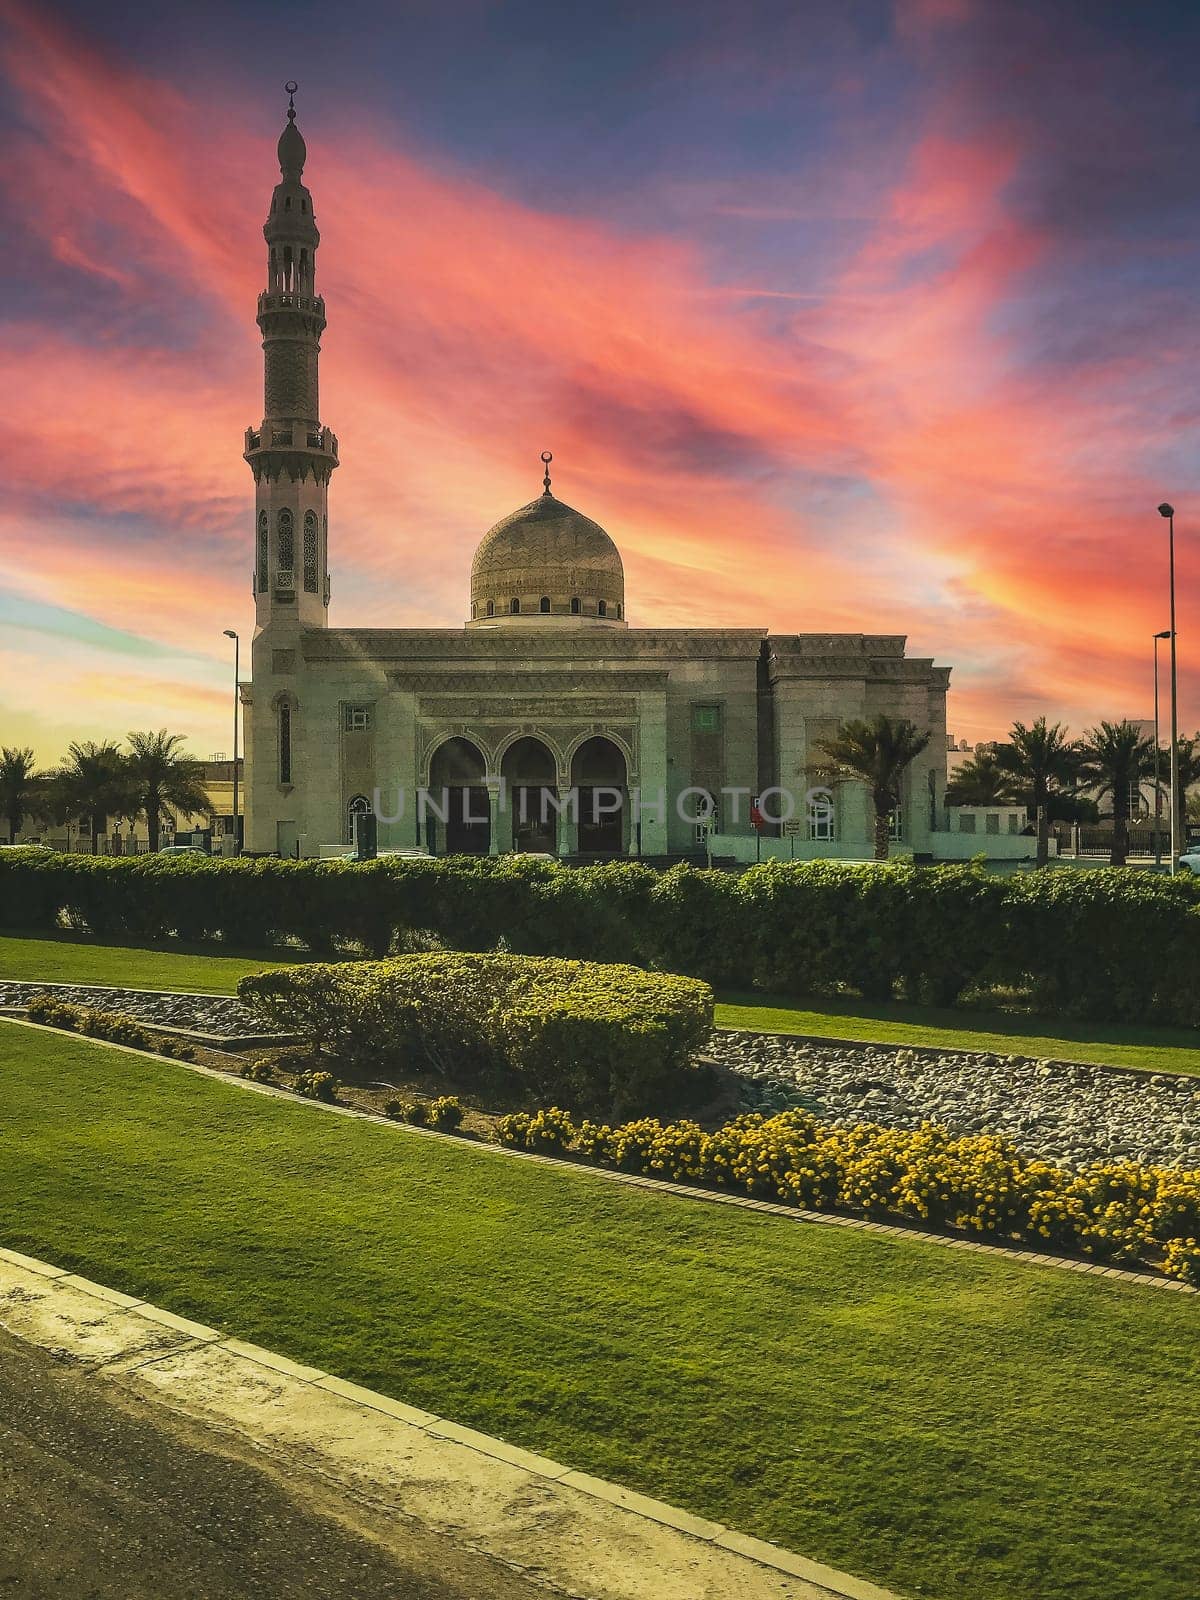 A photo of a white mosque with a dome and a minaret at sunset. The mosque is surrounded by a green garden with yellow flowers. The image has a low angle and an orange and pink sky. High quality photo